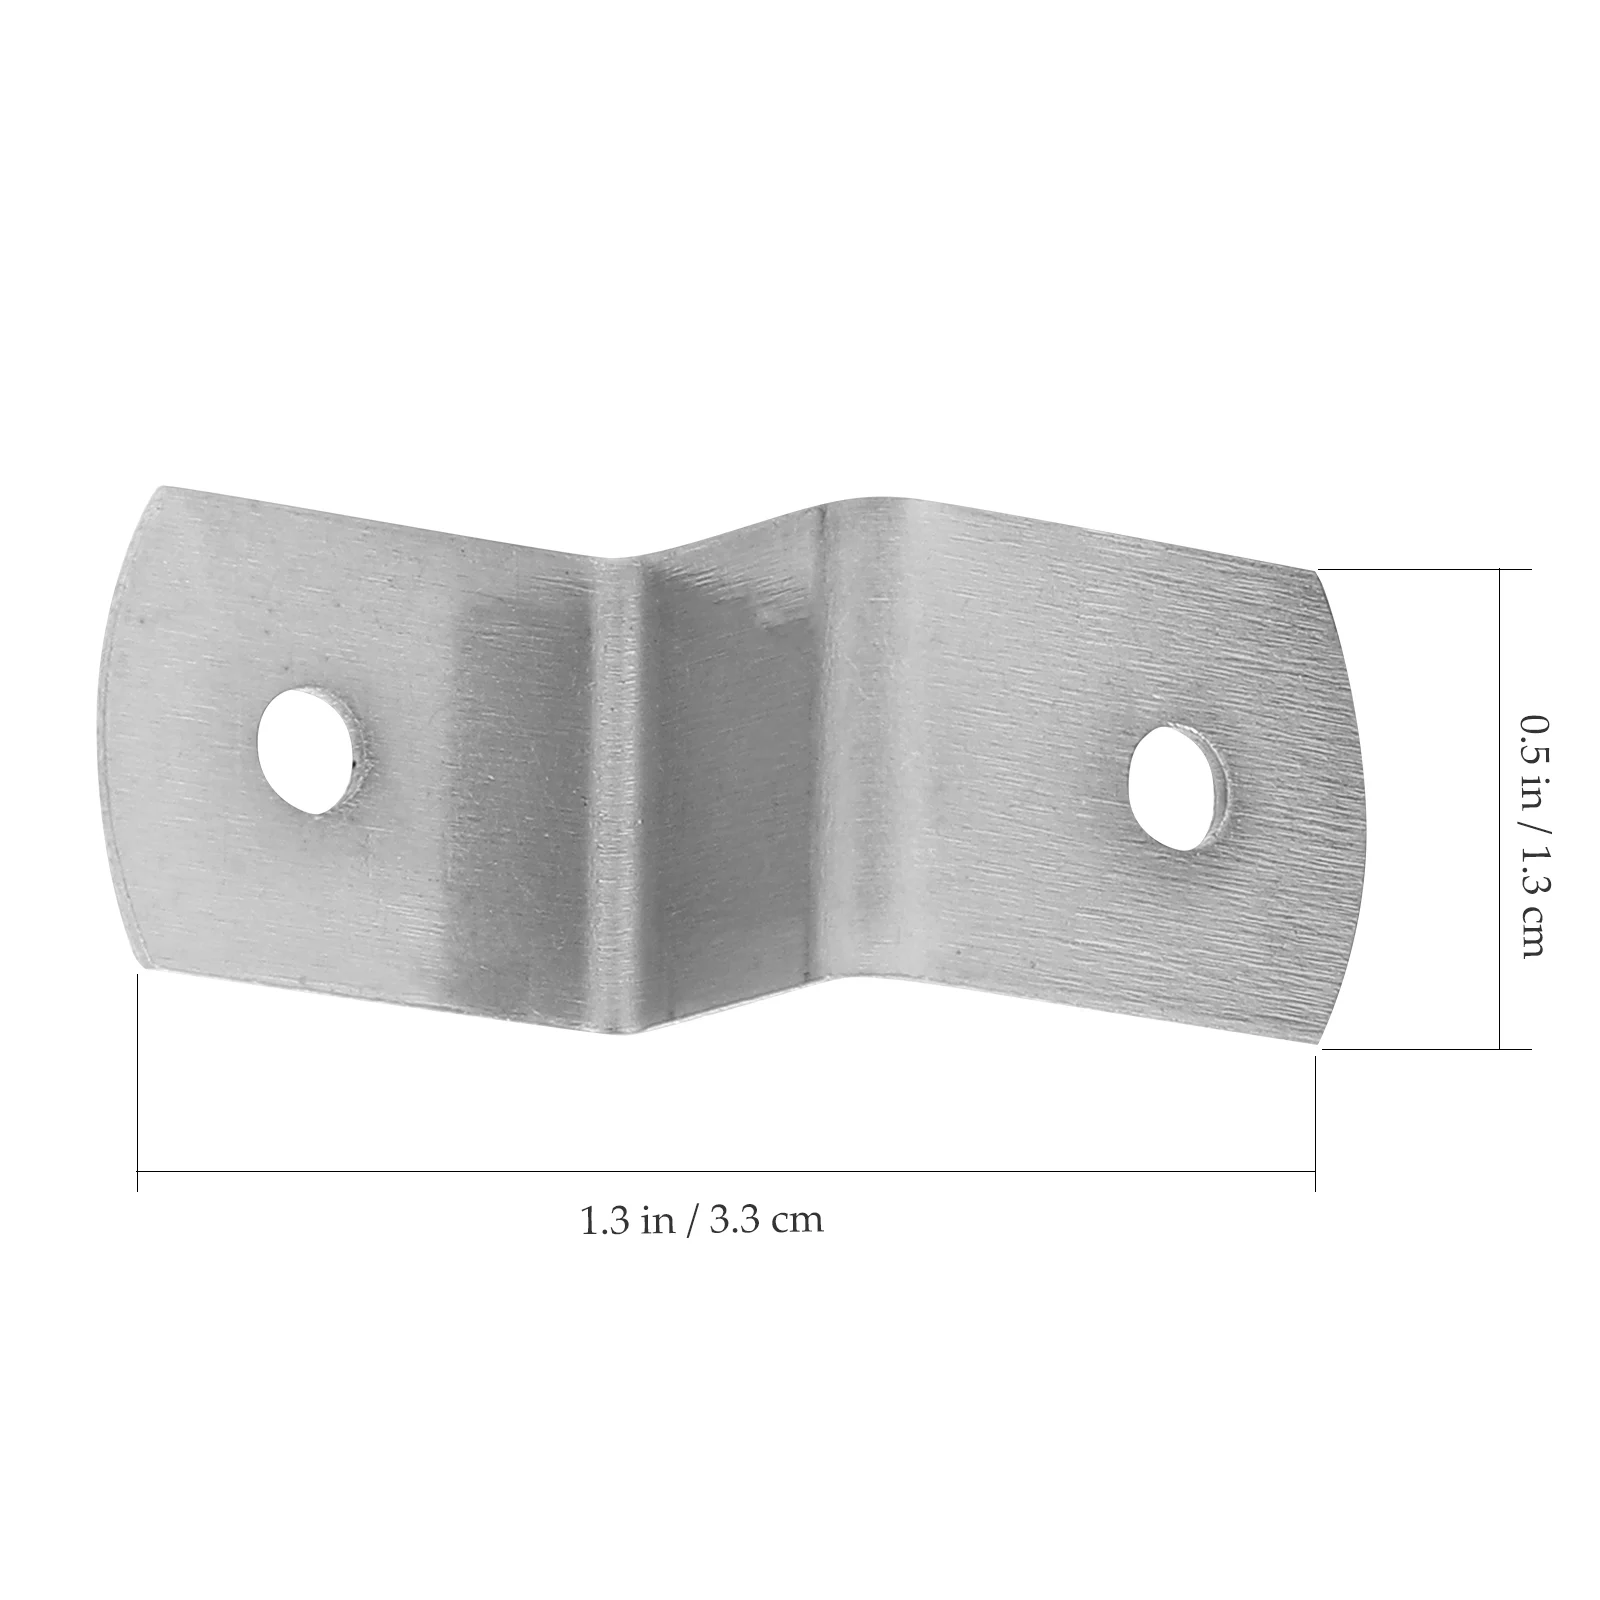 Picture Angle Brackets Bracket Clips Right Z Frame Hanging Framing Fastener Supplies L Table Corner Joint Duty Heavy Shape enlarge